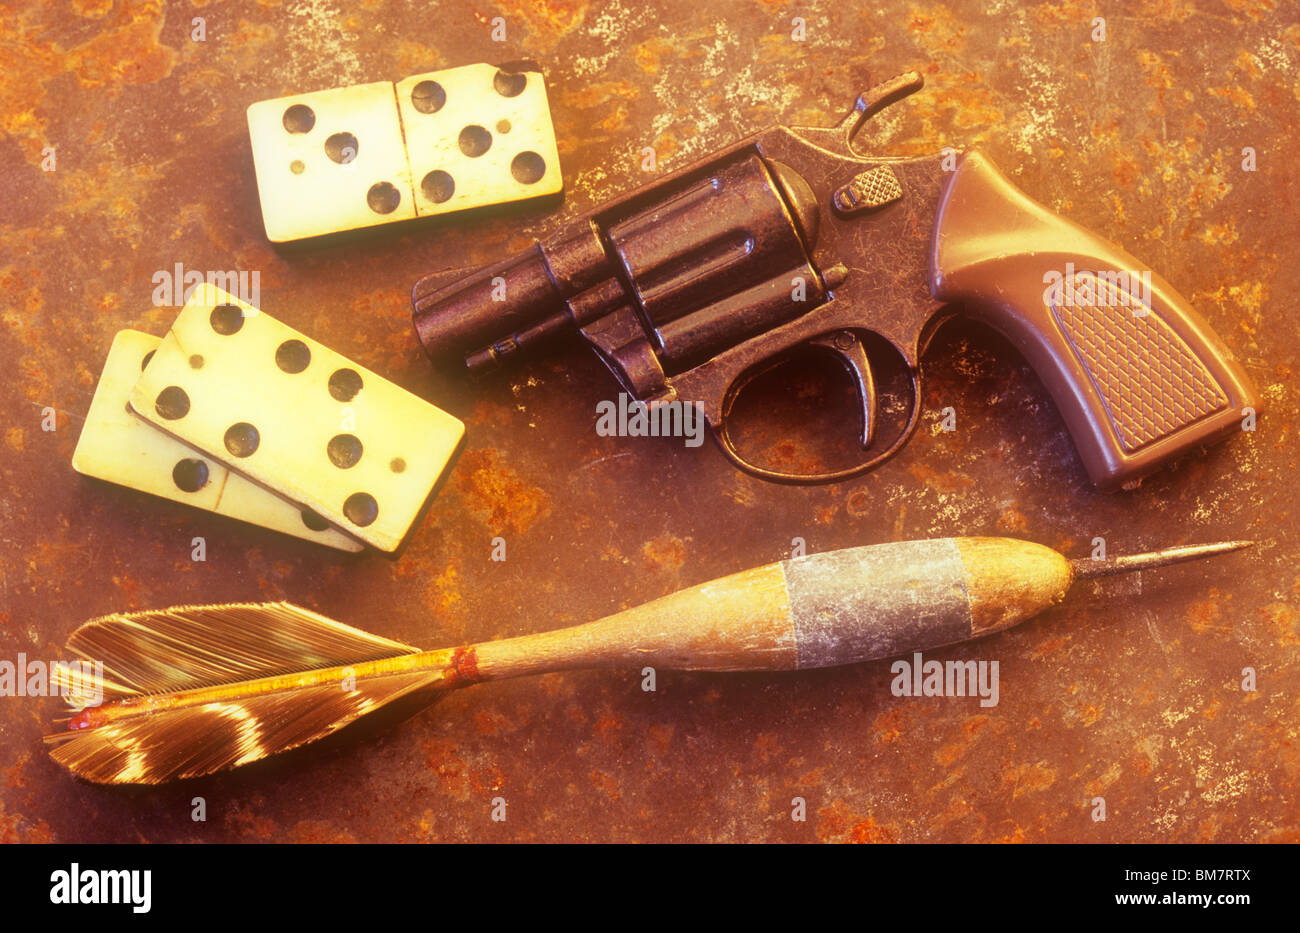 Old dartboard dart lying on rusty metal sheet in warm light with three domino pieces and toy pistol Stock Photo